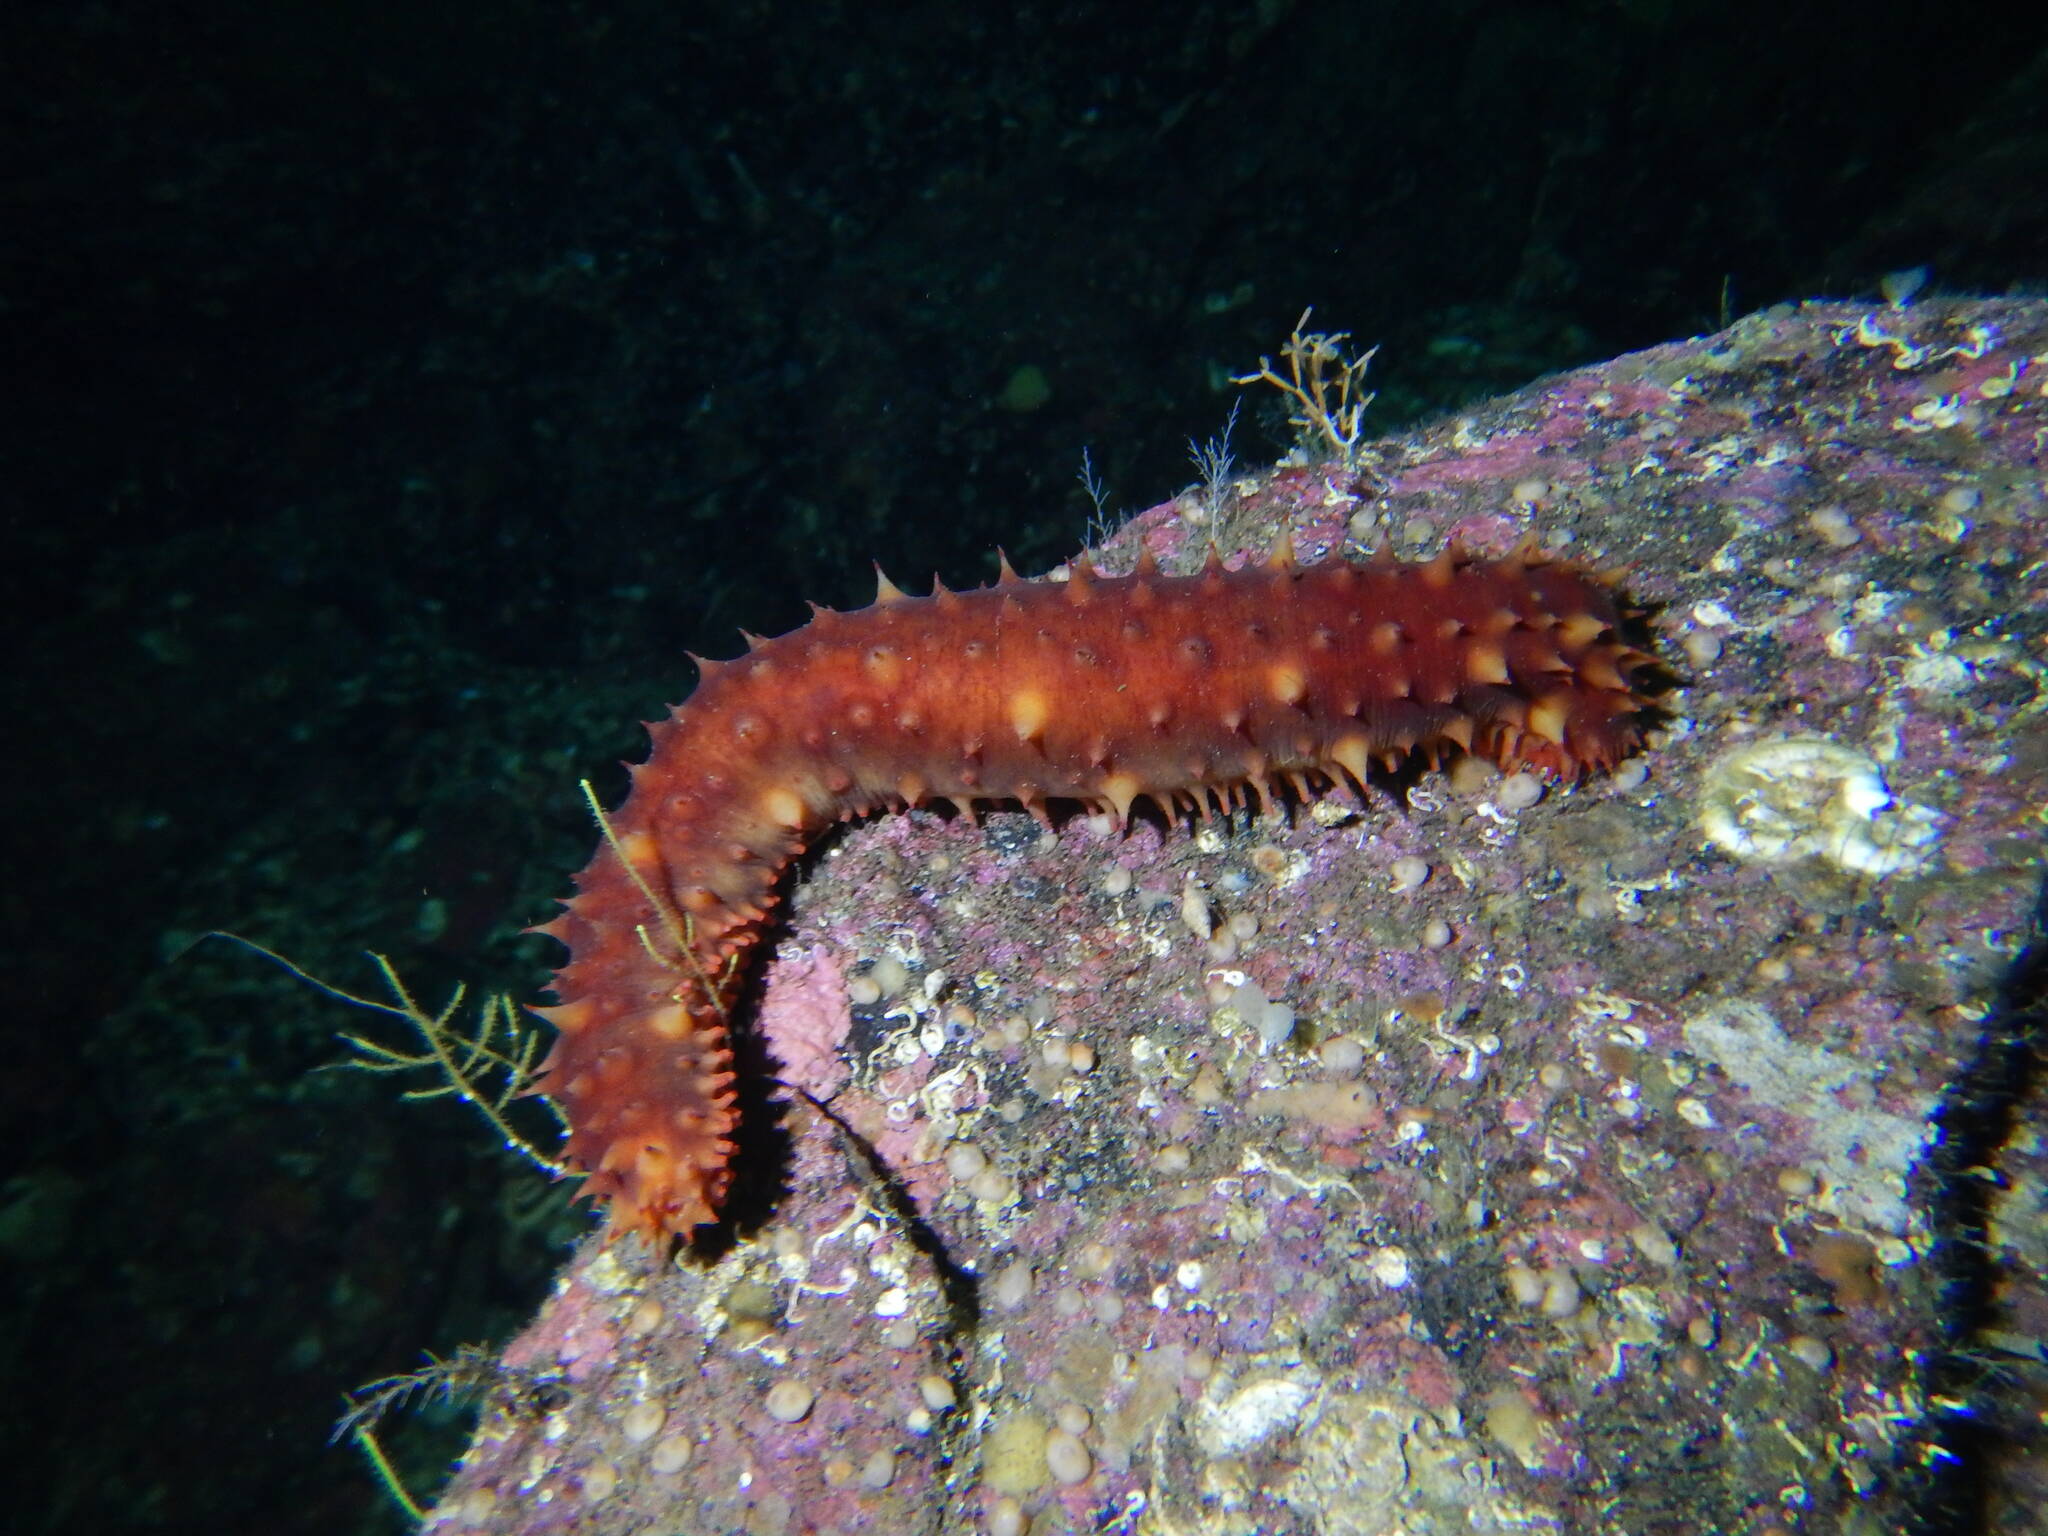 A look at the sea cucumber in its natural habitat. The season kicked off on Oct. 2 with improved prices from last year and numbers as predicted by fishery managers. (Photo courtesy of the Alaska Department of Fish and Game)